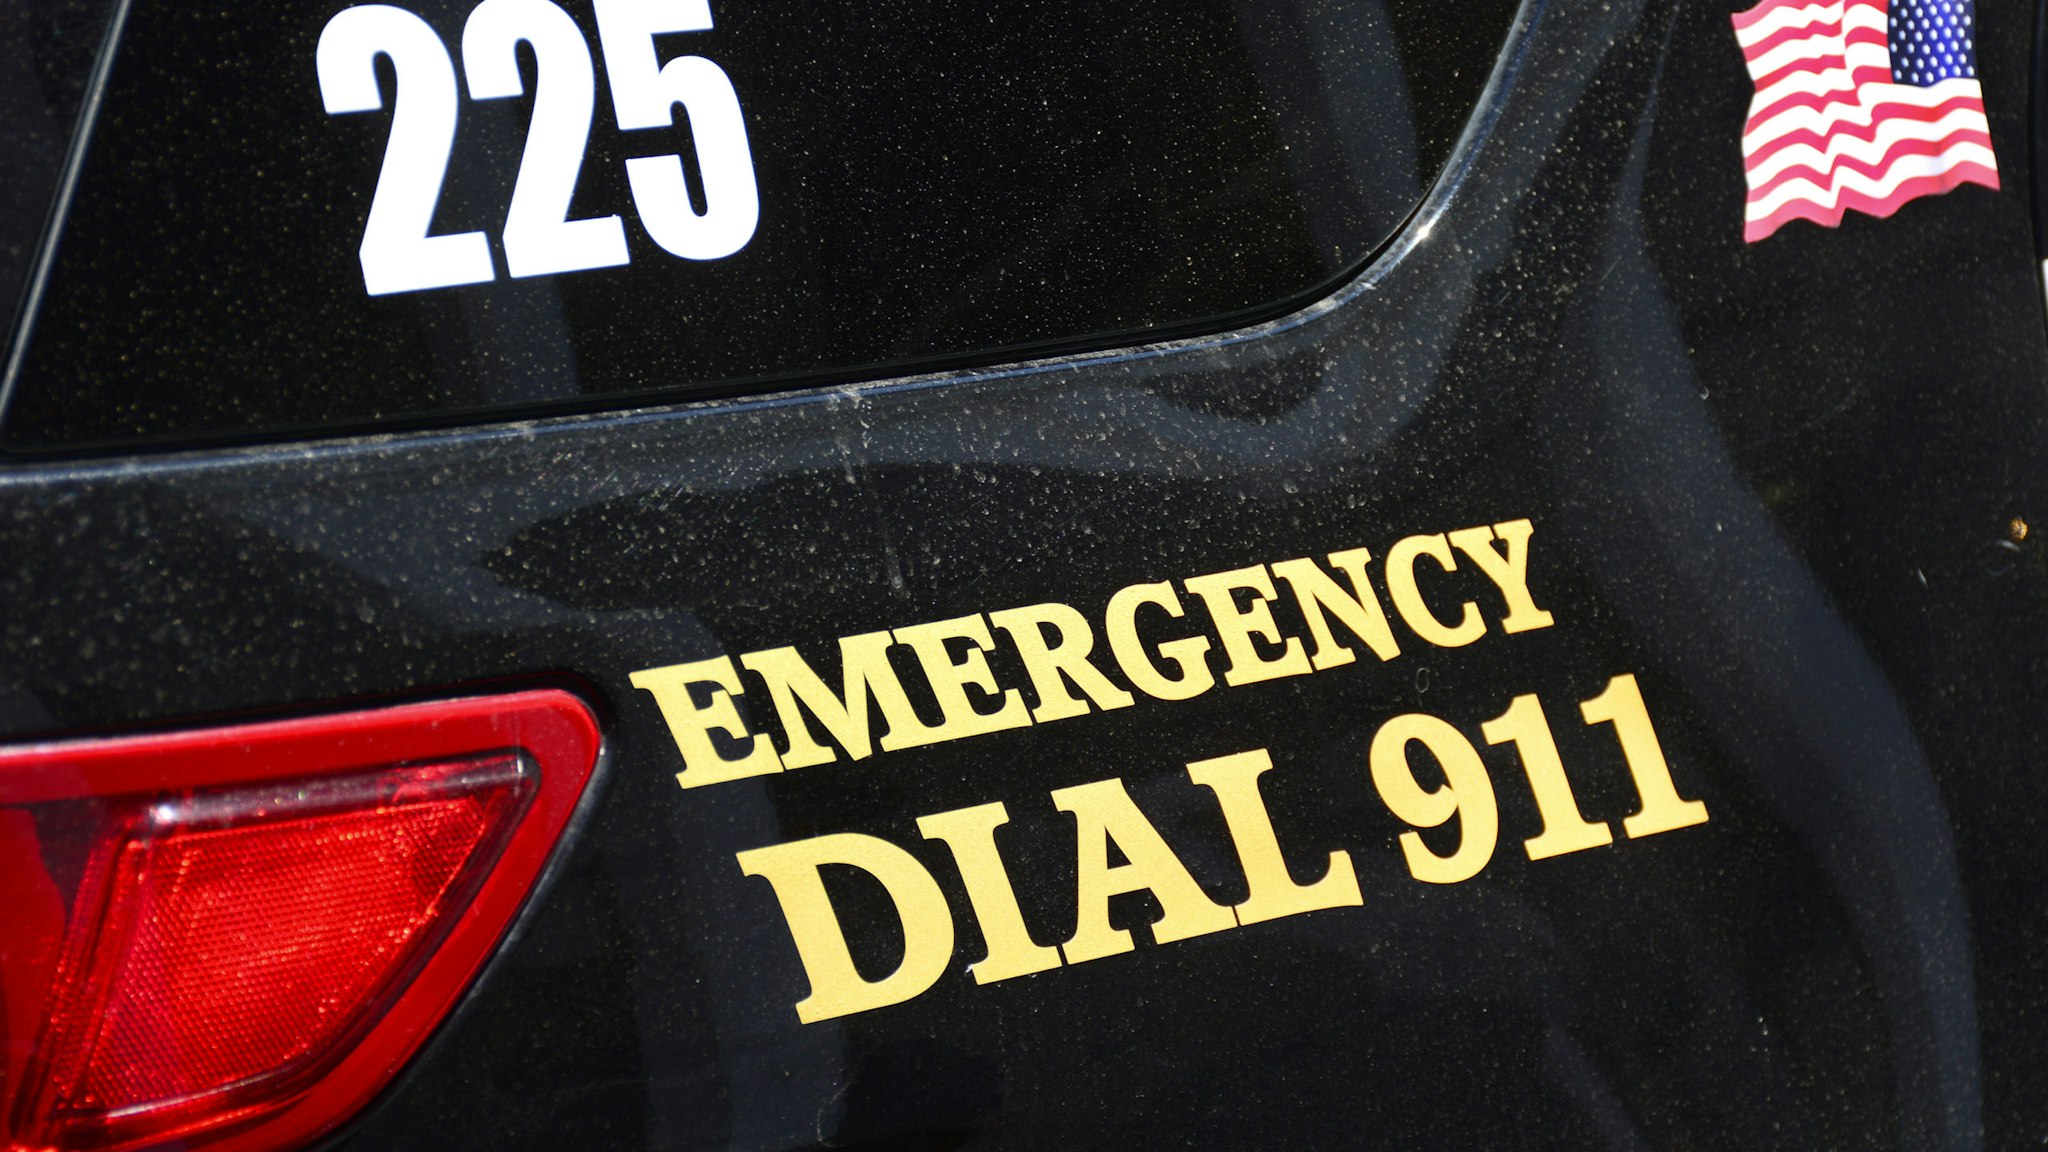 SANTA FE, NM - JULY 27, 2017: A Santa Fe, New Mexico, police car is marked with 'Emergency Dial 911' painted on its side.